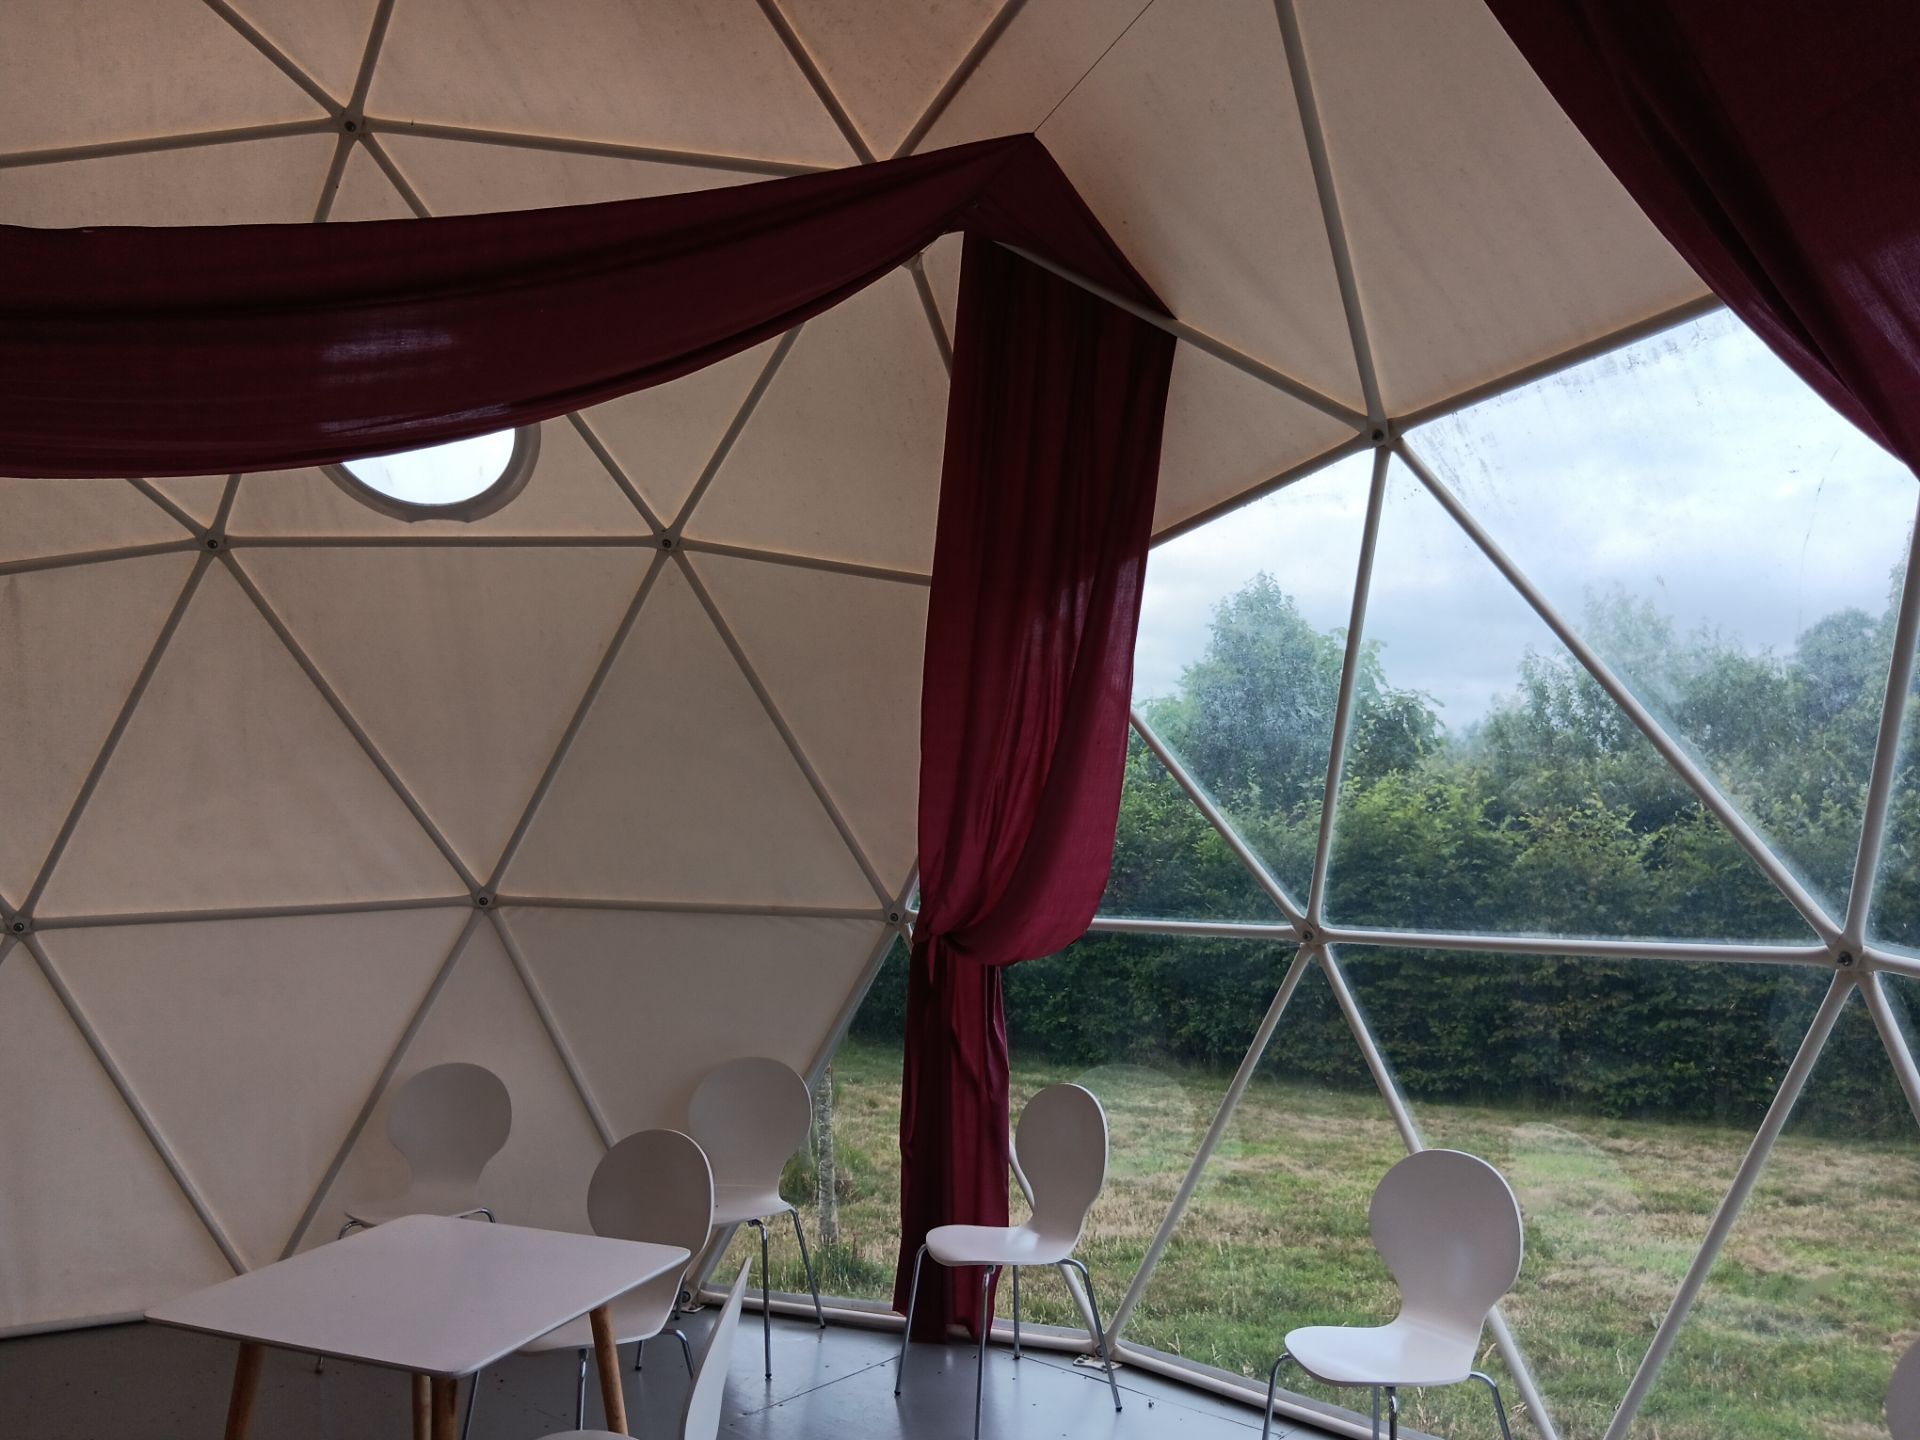 Pacific Domes 7m geodesic dome tent (October 2018) contents excluded Viewing strongly recommended to - Image 5 of 8